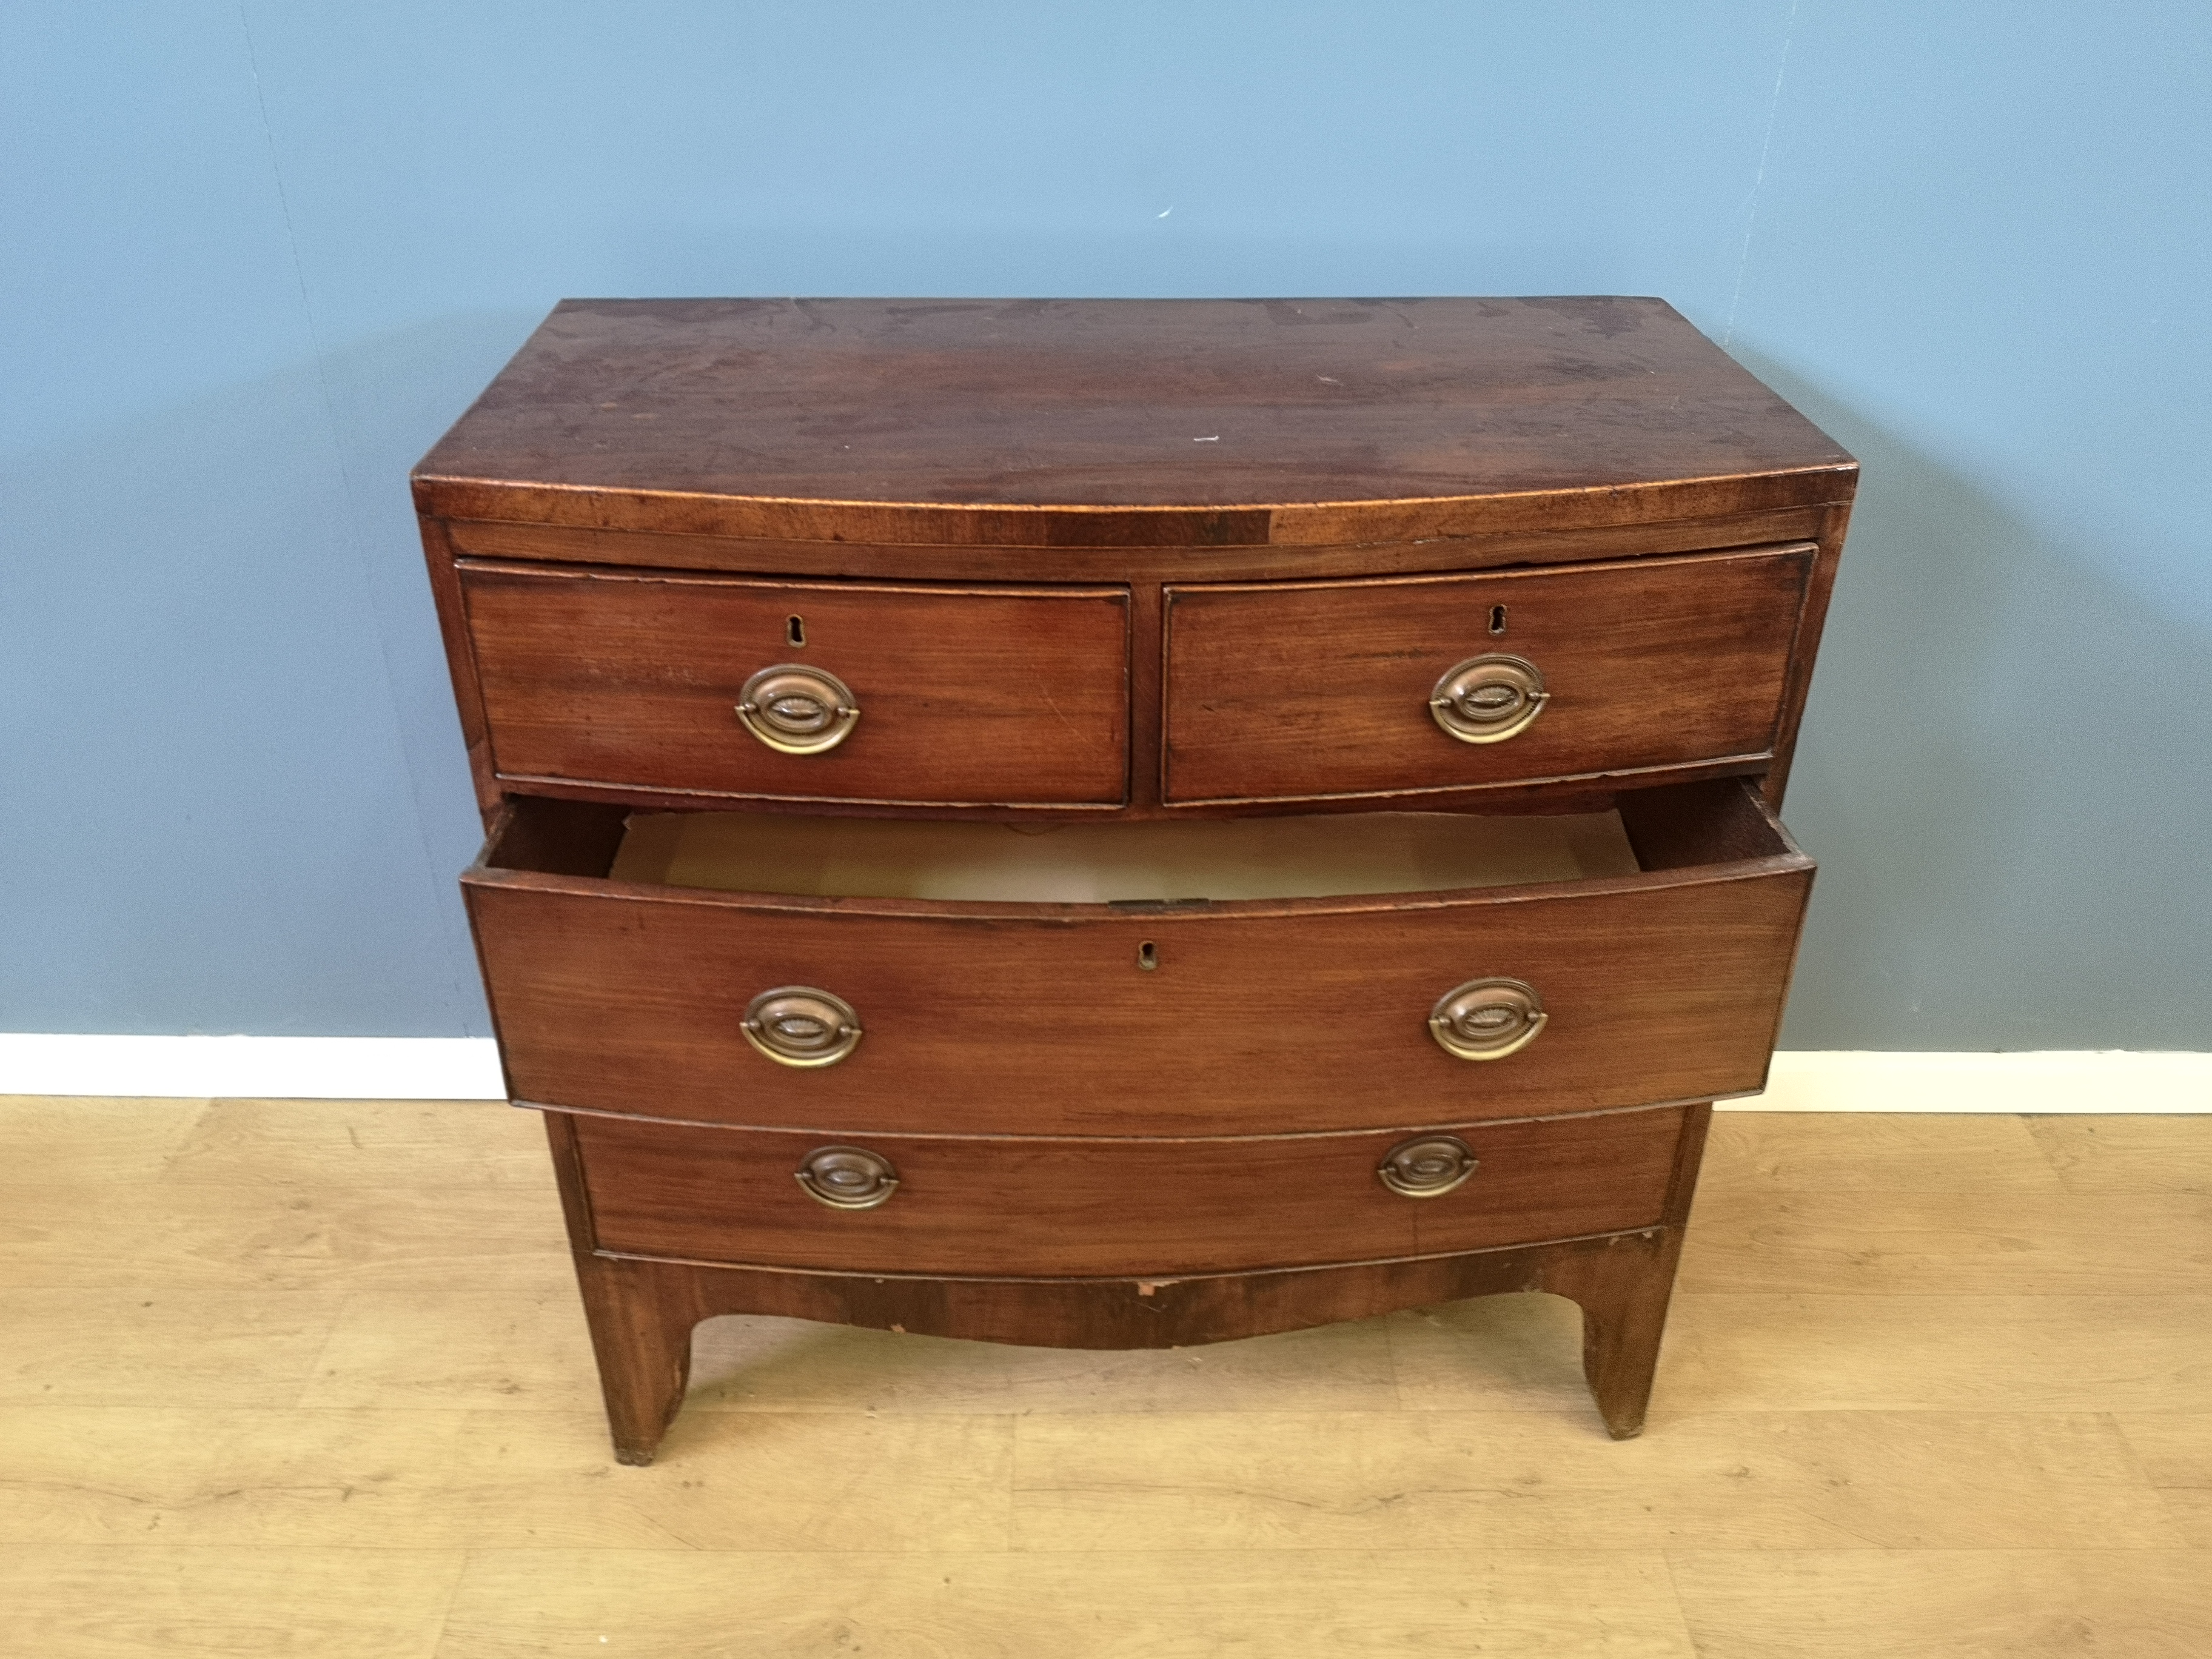 Regency mahogany chest of drawers - Image 3 of 6